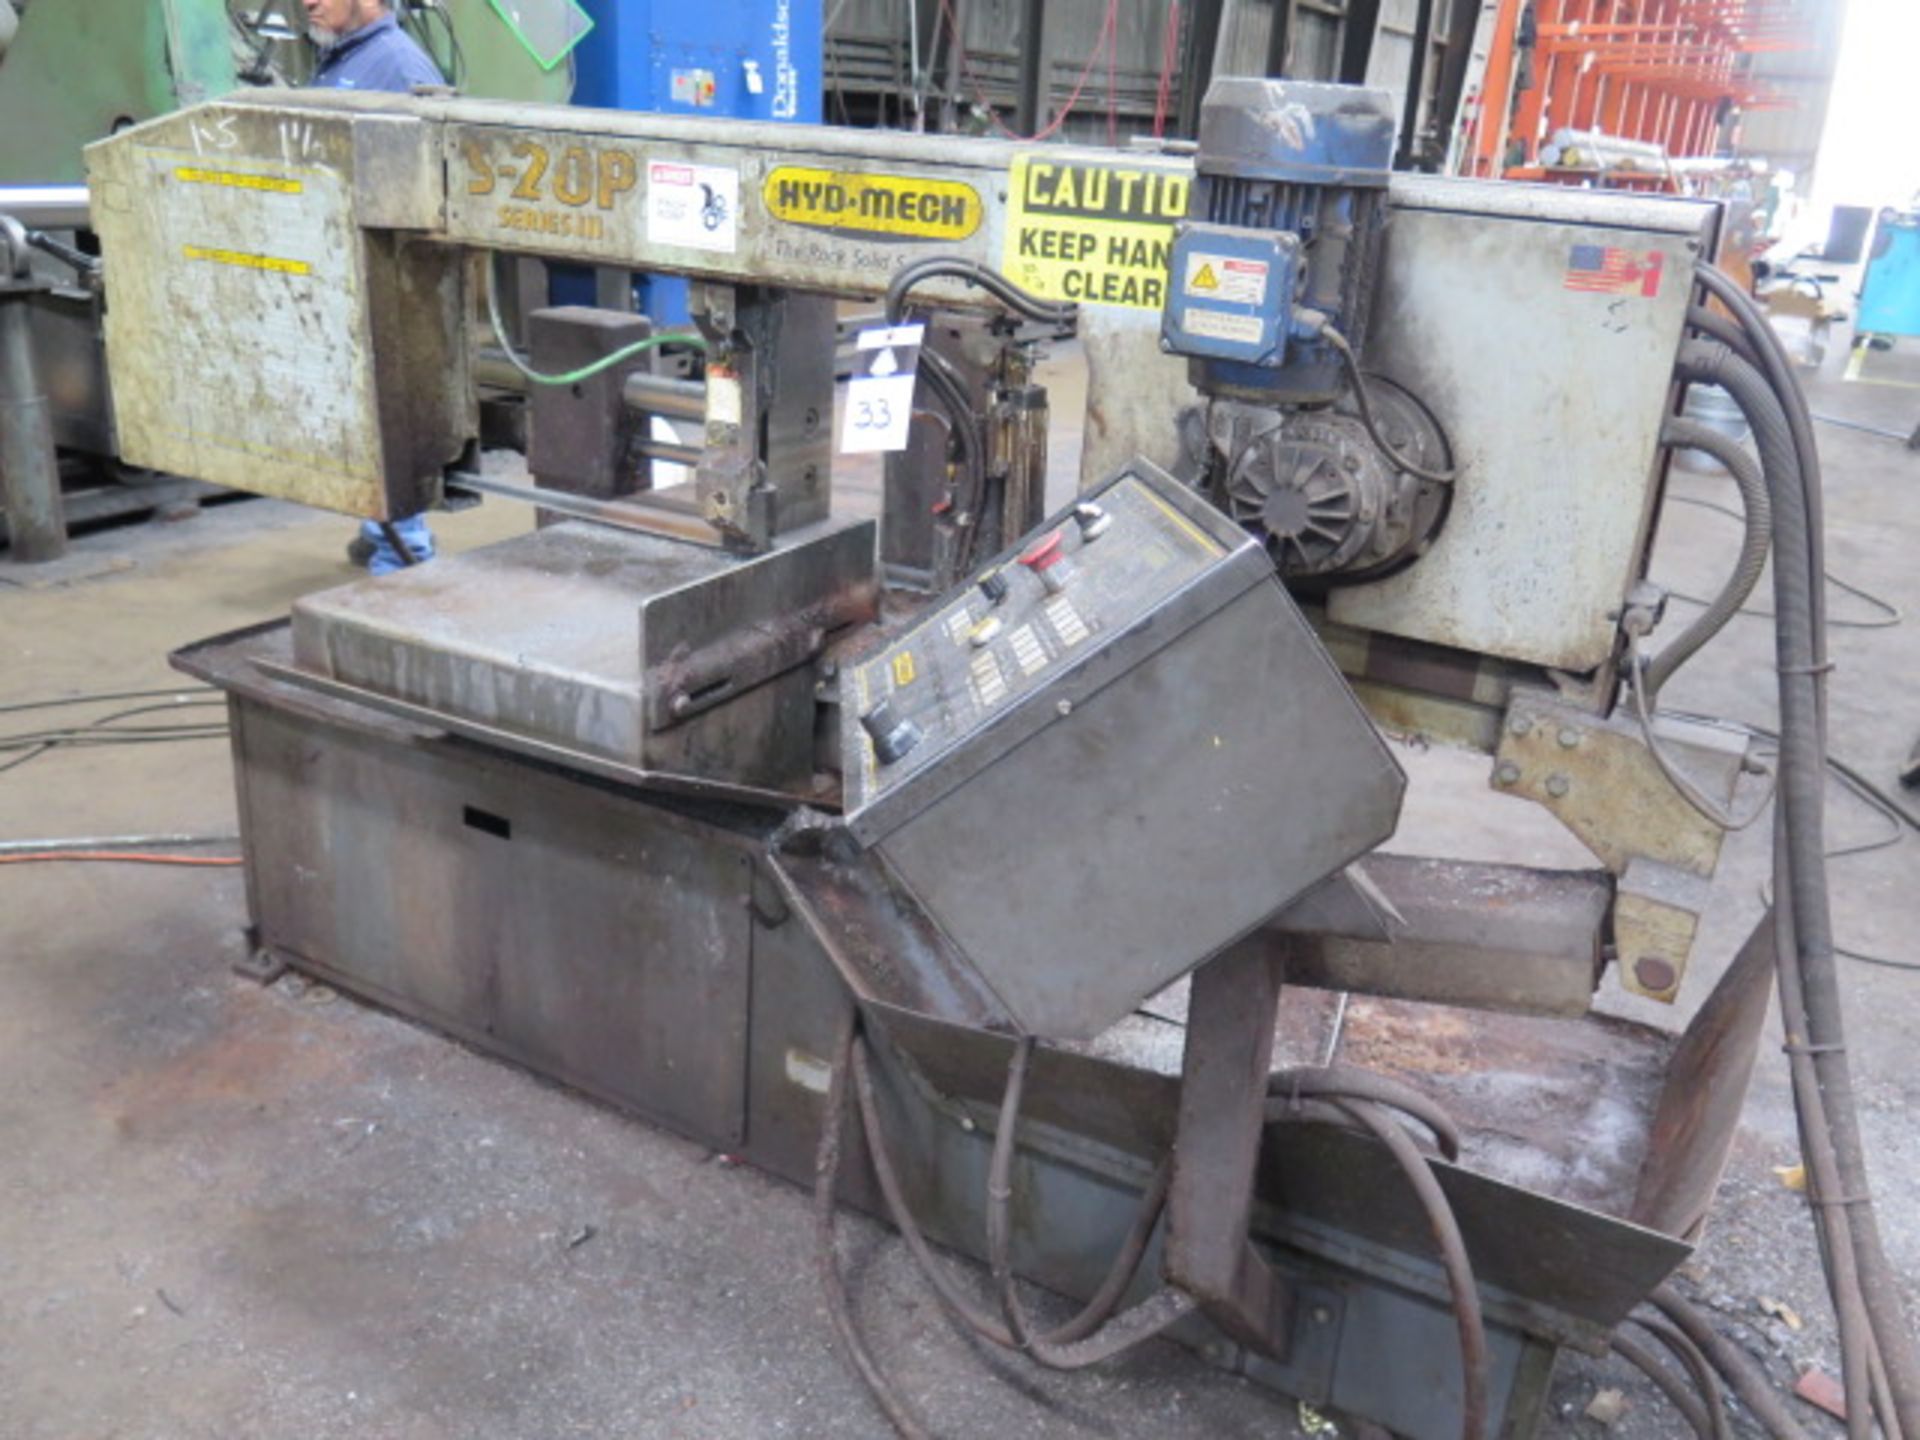 Hyd-Mech S-20P Series III 13” Horizontal Band Saw w/ Hyd-Mech Controls, Hyd Clamping, SOLD AS IS - Image 2 of 11